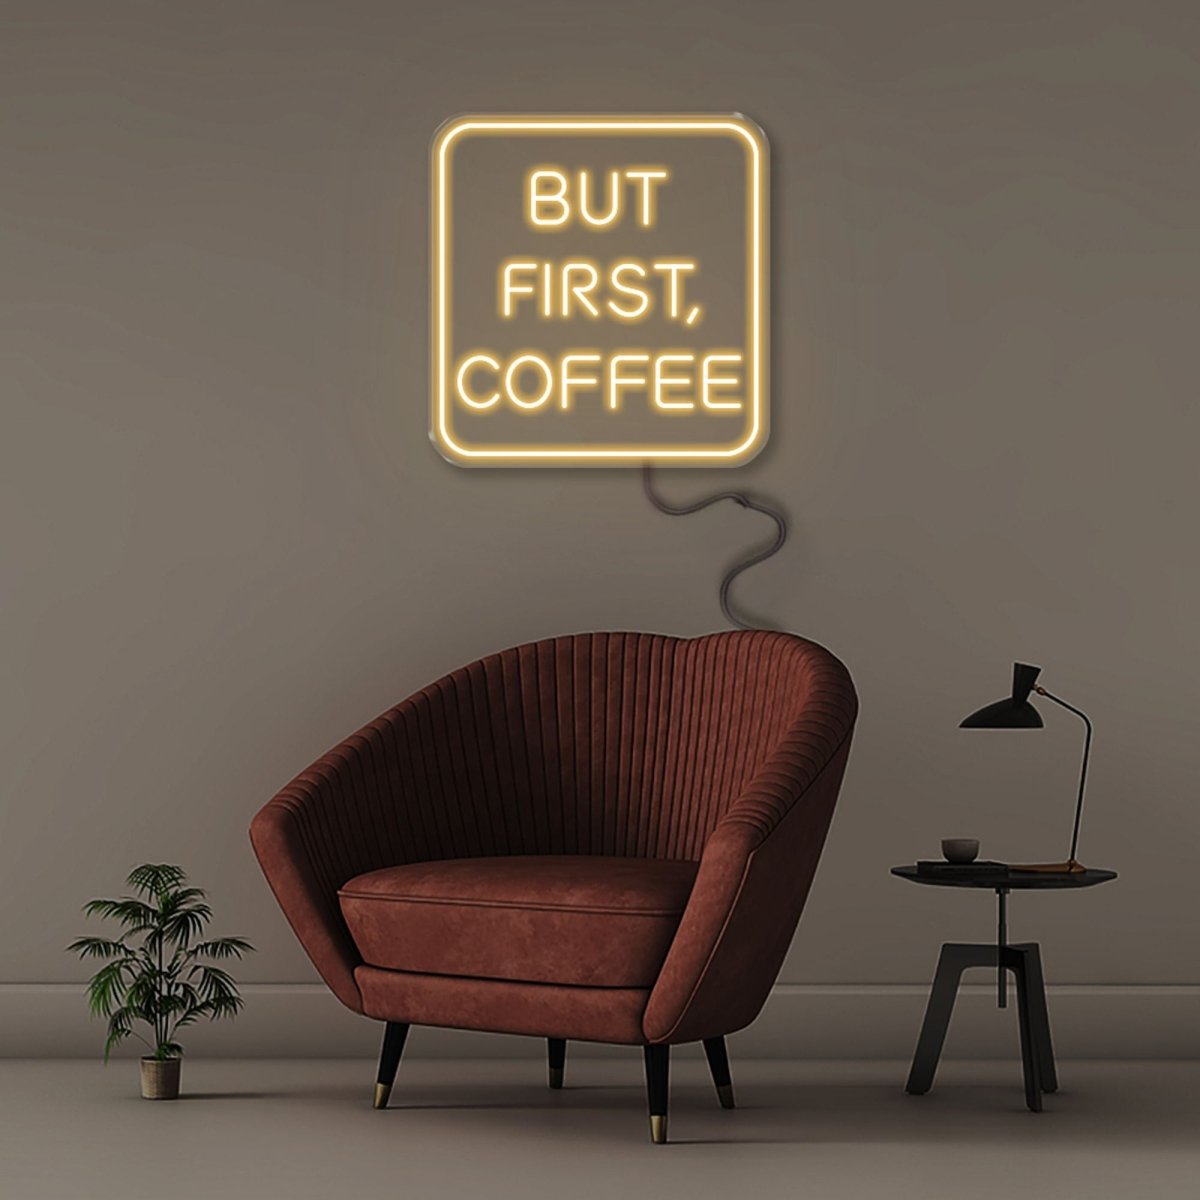 But First Coffee - Neonific - LED Neon Signs - 61cm (24") -